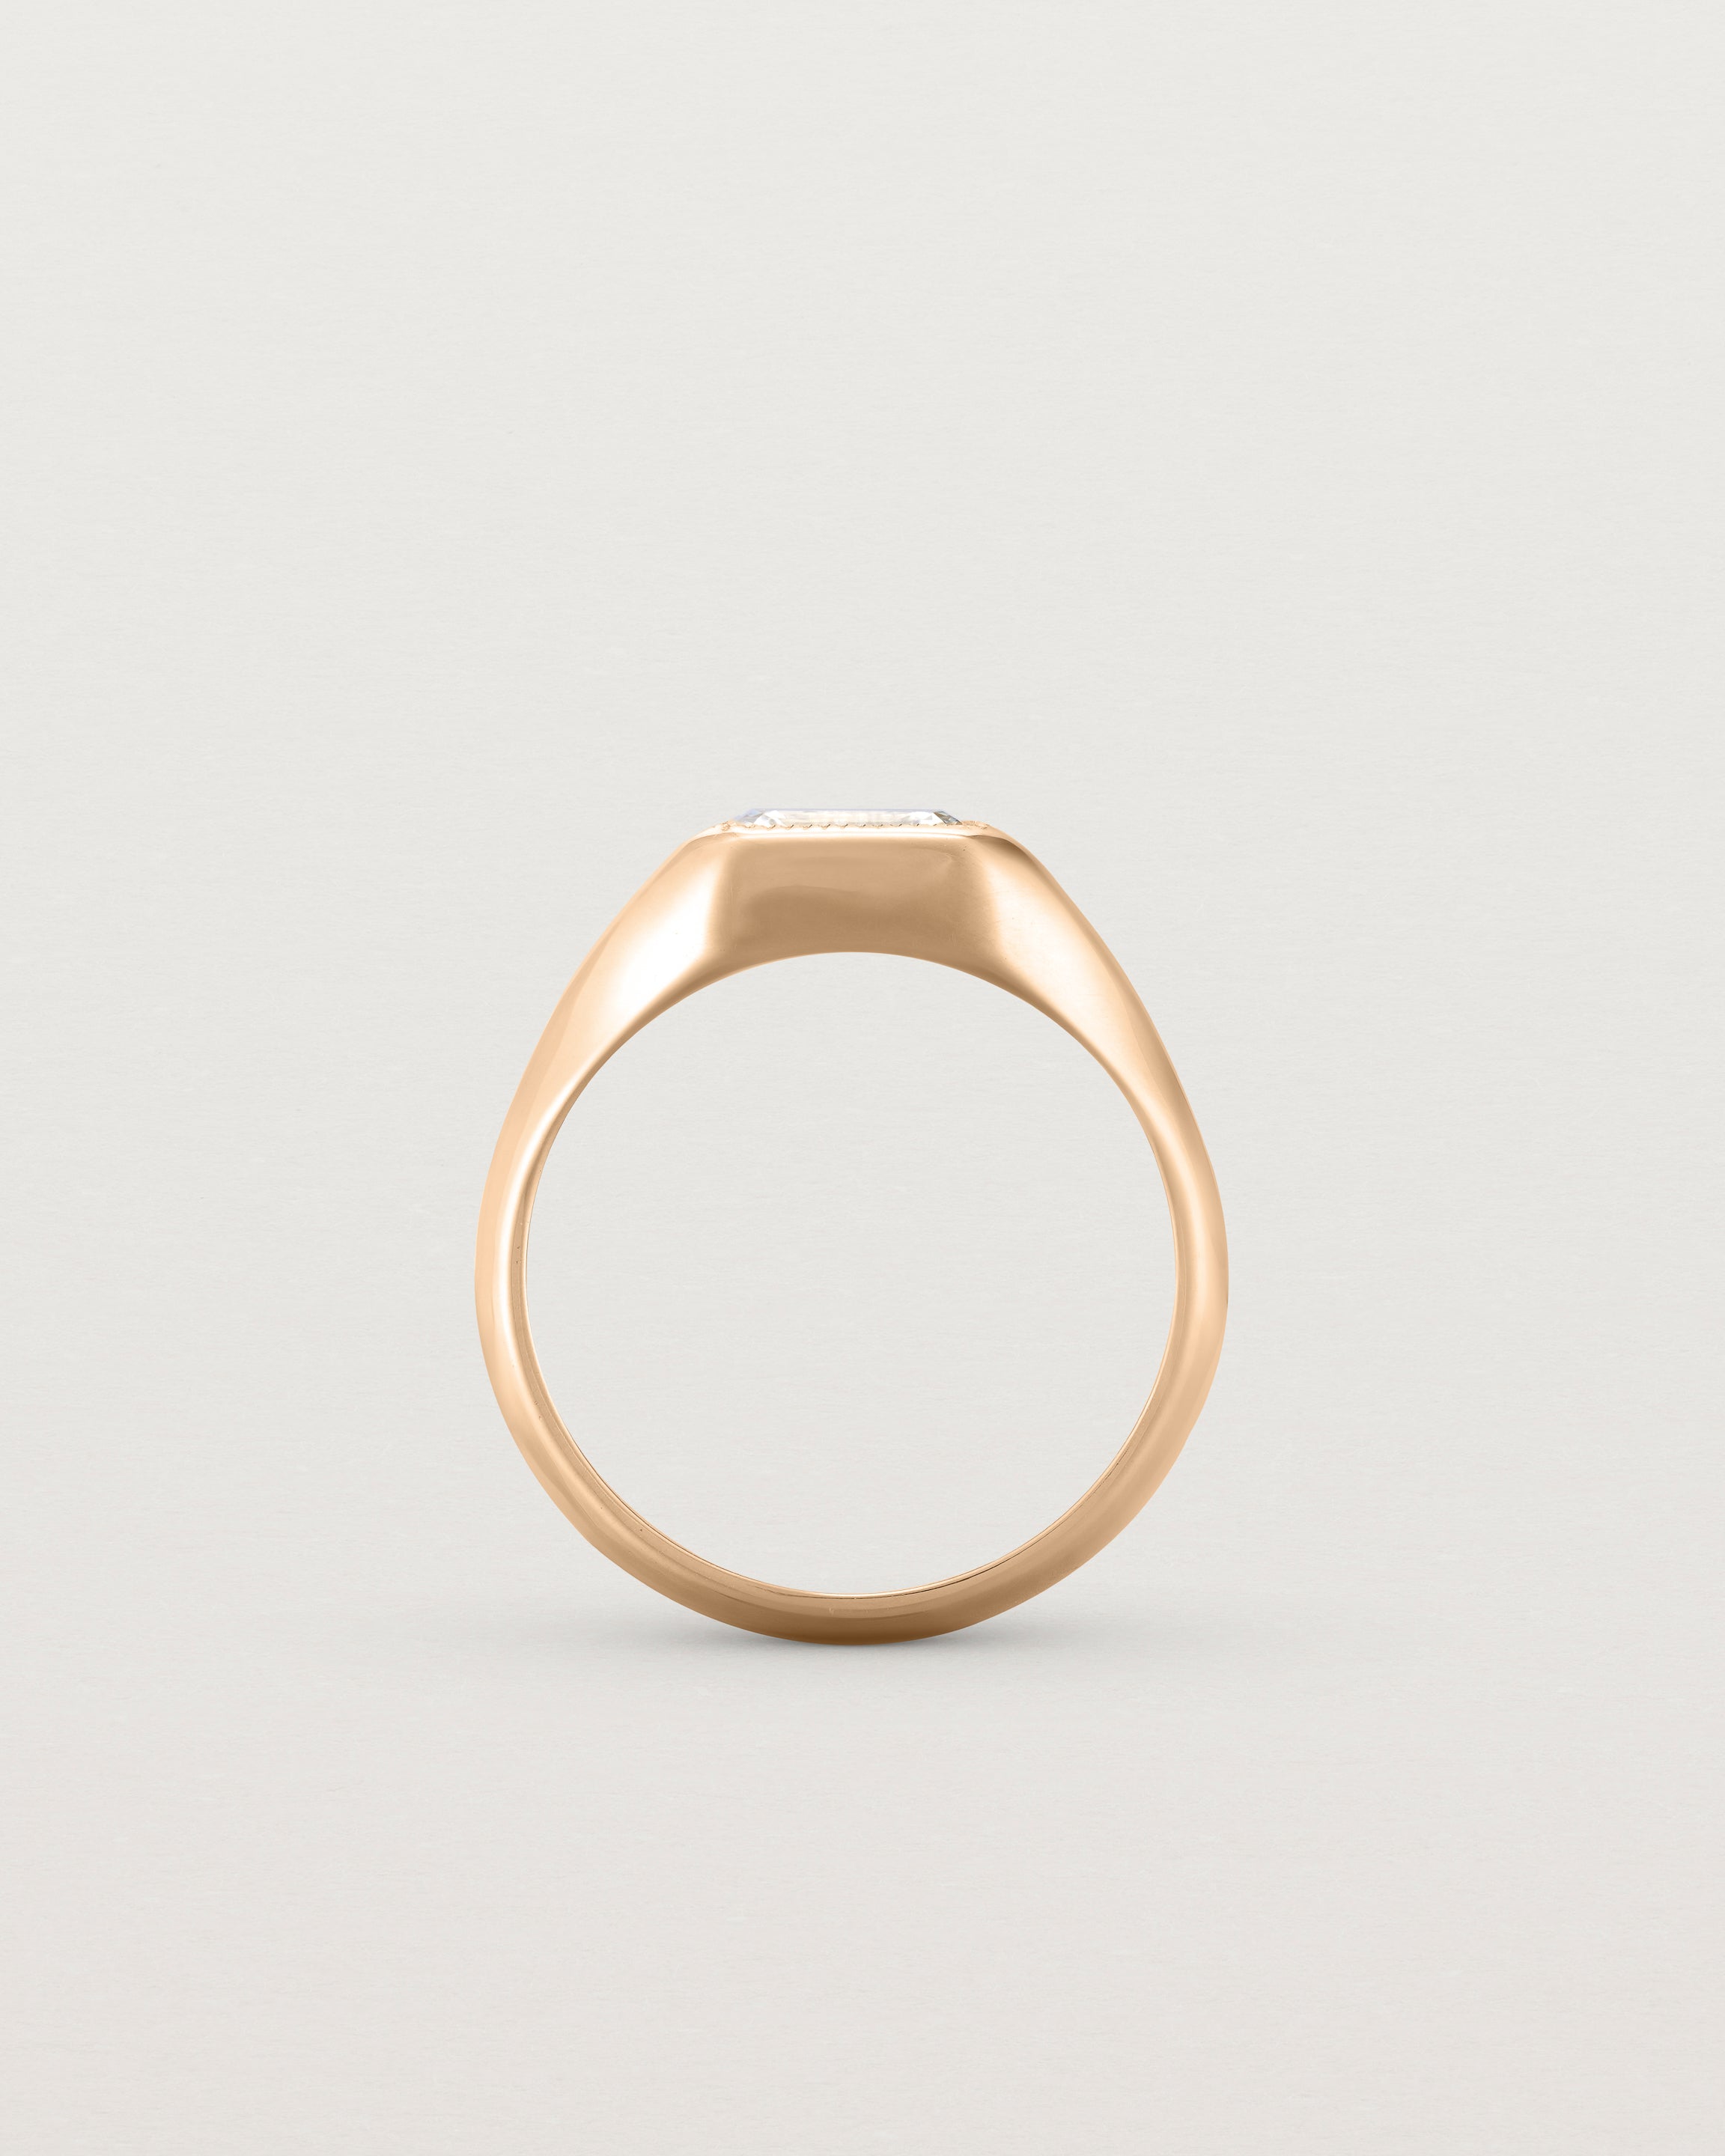 Standing view of the Átlas Emerald Signet | Laboratory Grown Diamond in rose gold with a polished finish.